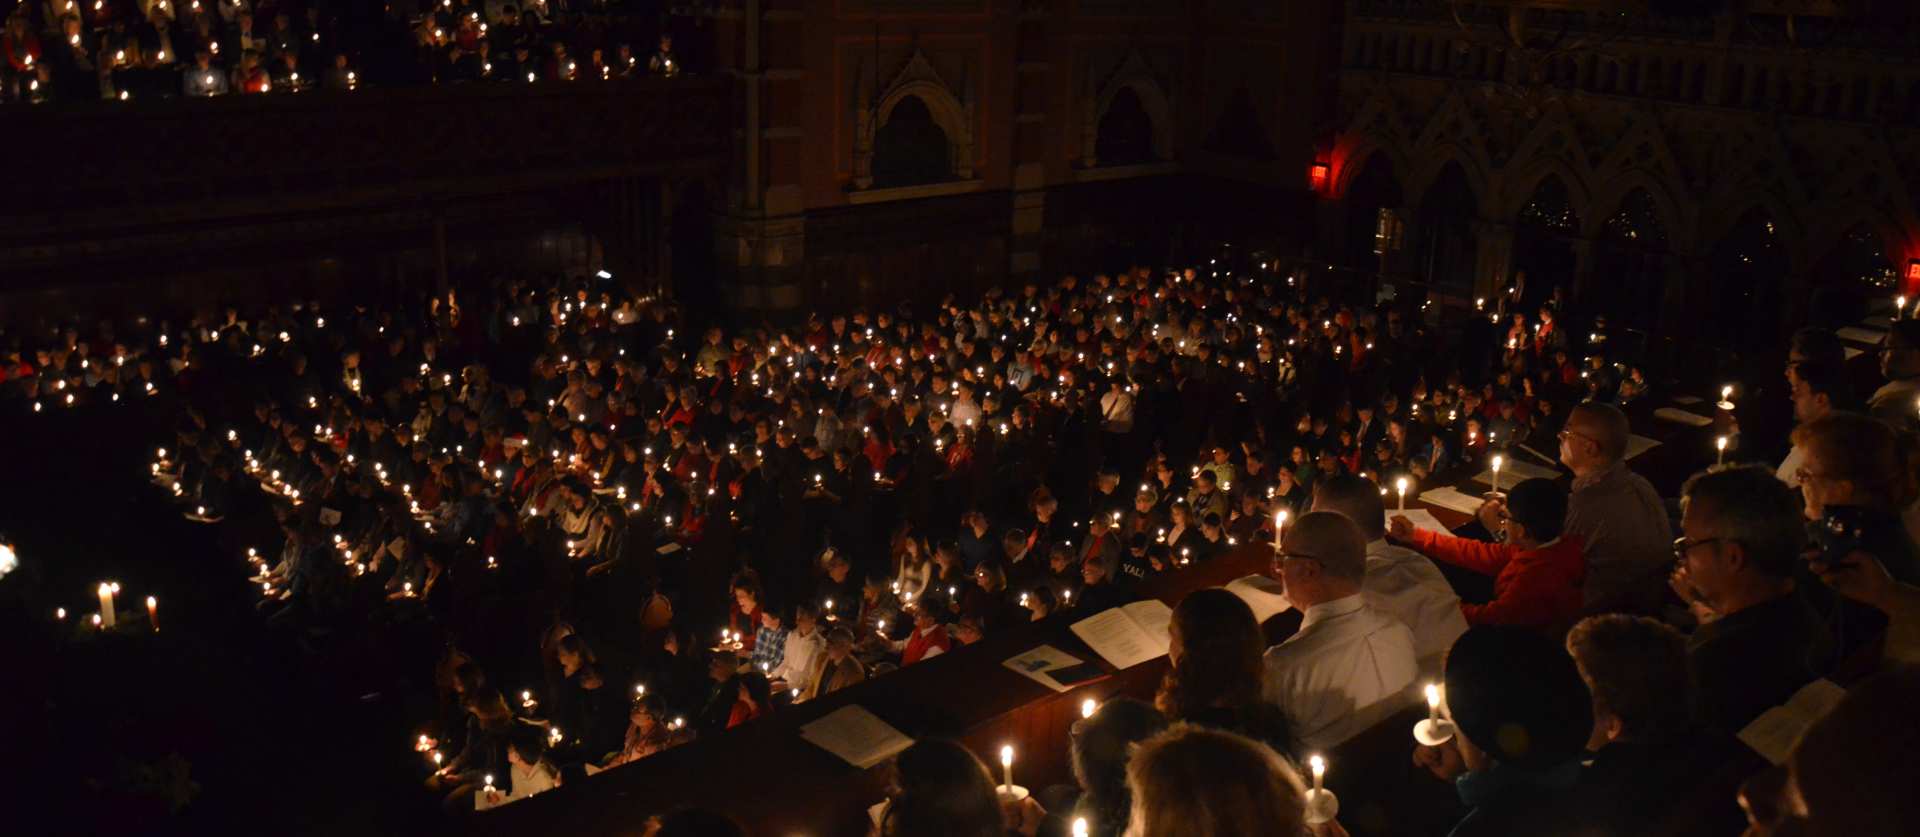 candlelight service with people in the dark in pews